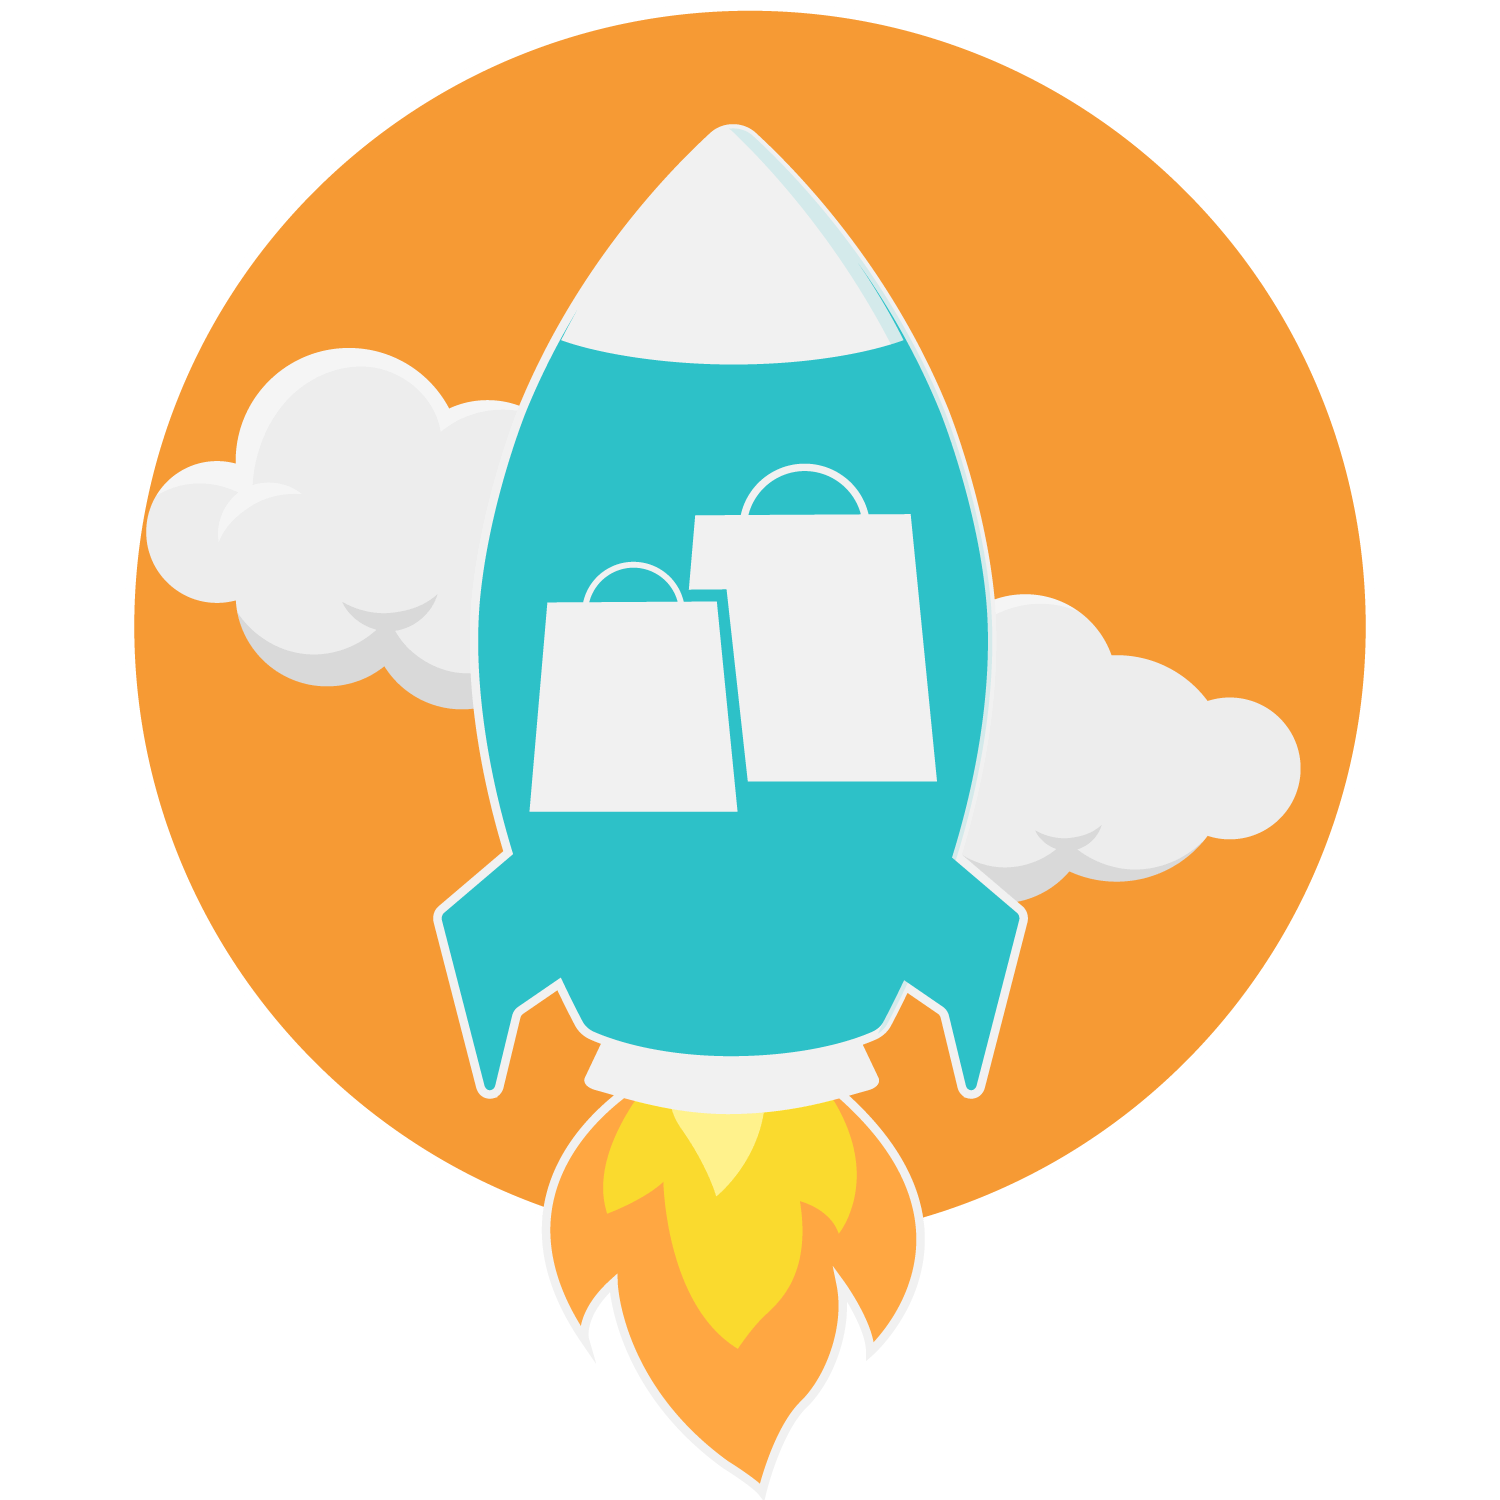 SALES-BOOSTER-ICON-PROMOTIONS FOR AMAZON PRODUCTS WITH AMAZON COUPONS - SHOPPING BAGS IN A ROCKET